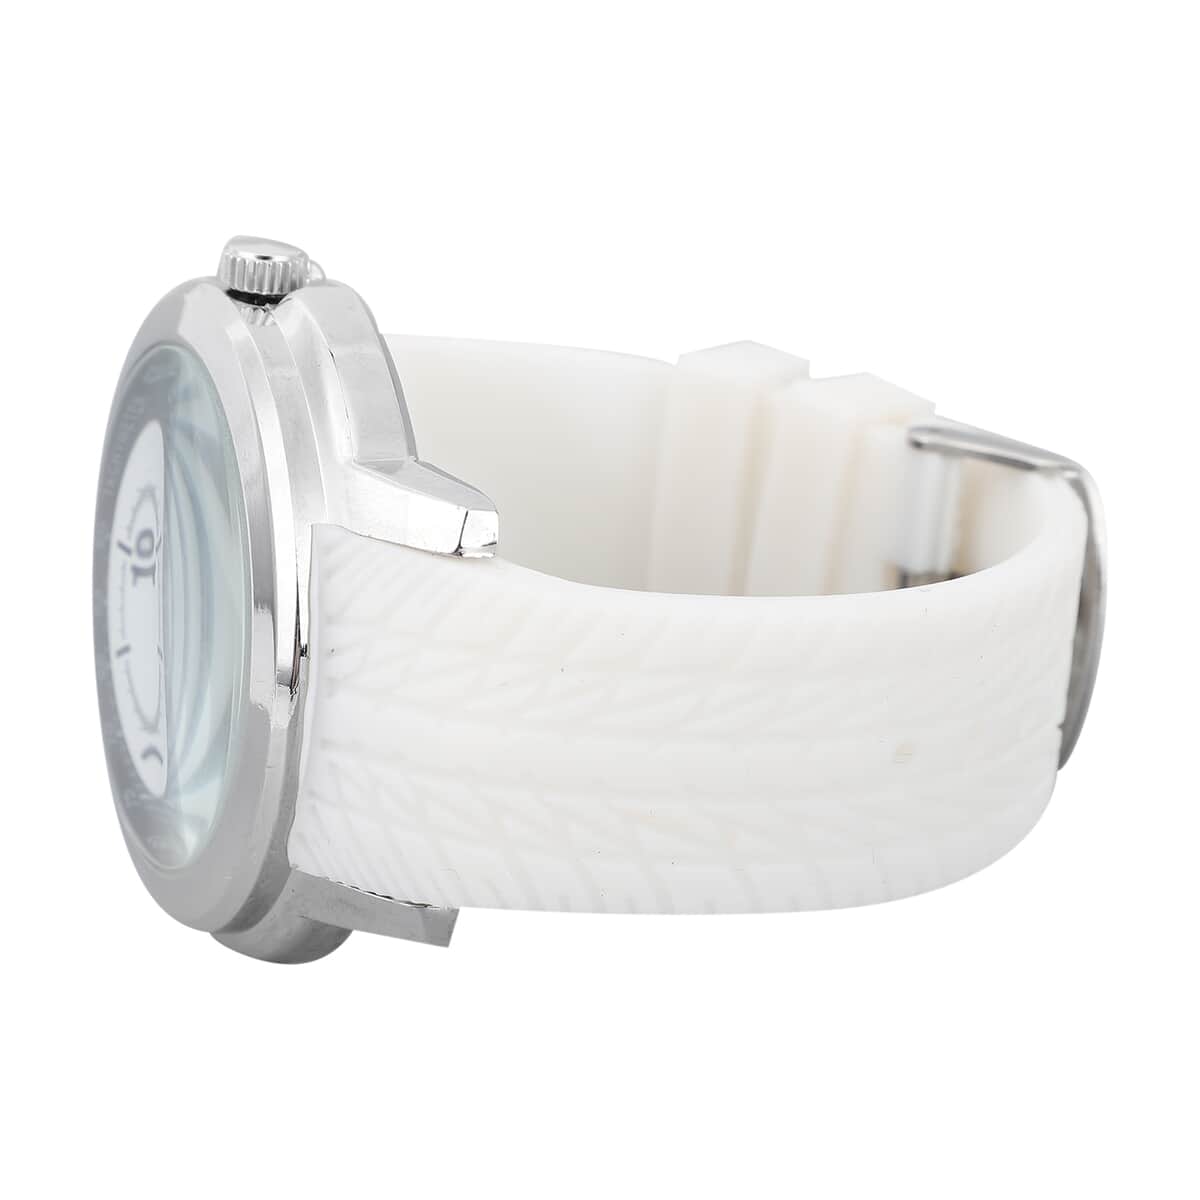 Strada Japanese Movement Watch with White Silicone Strap and Easy to See Dial image number 4